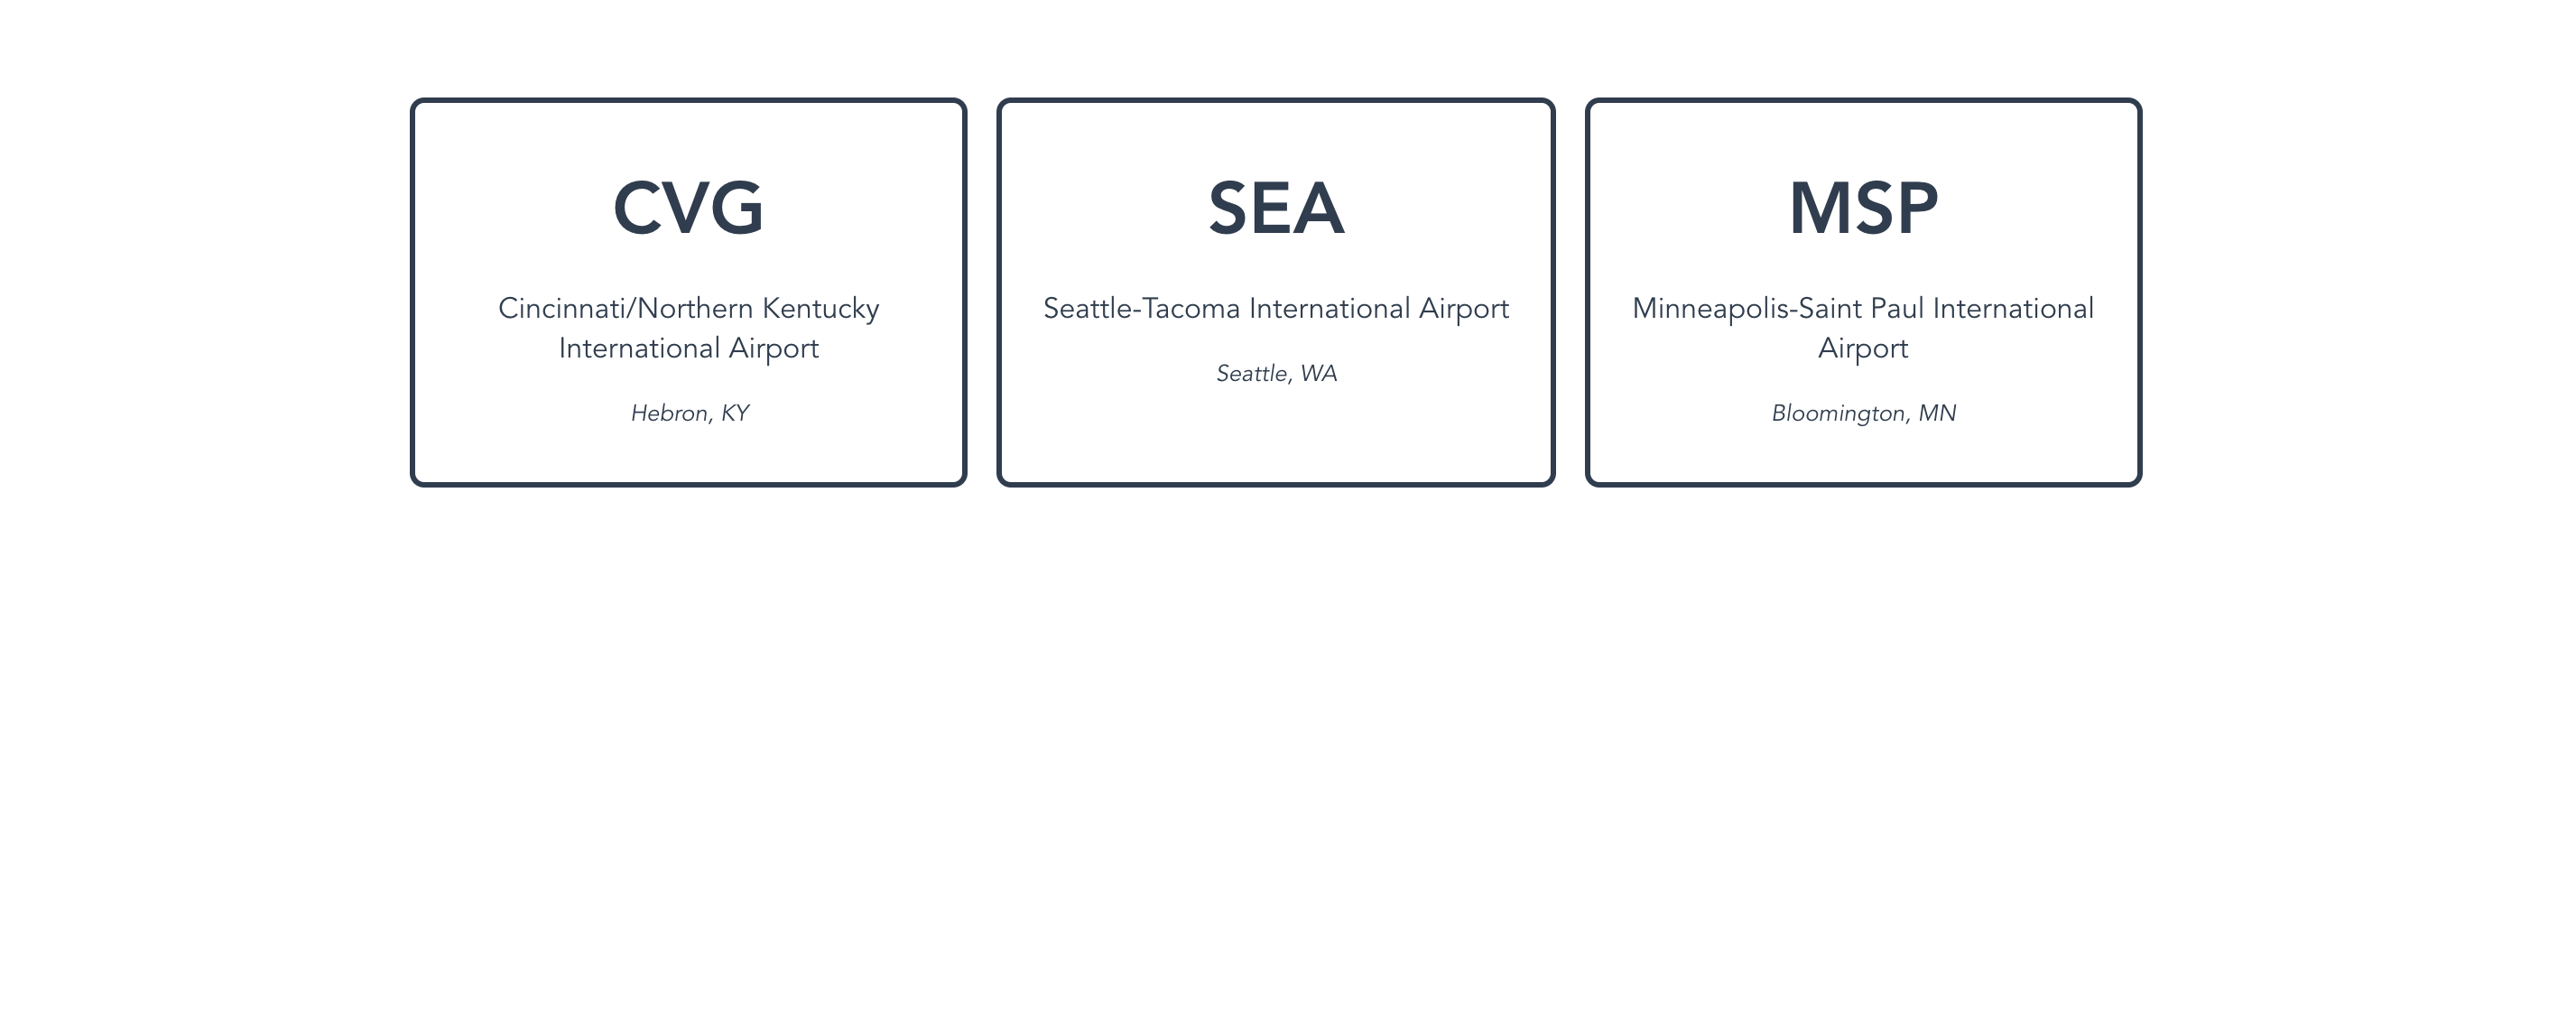 Three cards displaying information about airports, retrieved from the data/airports.js file.